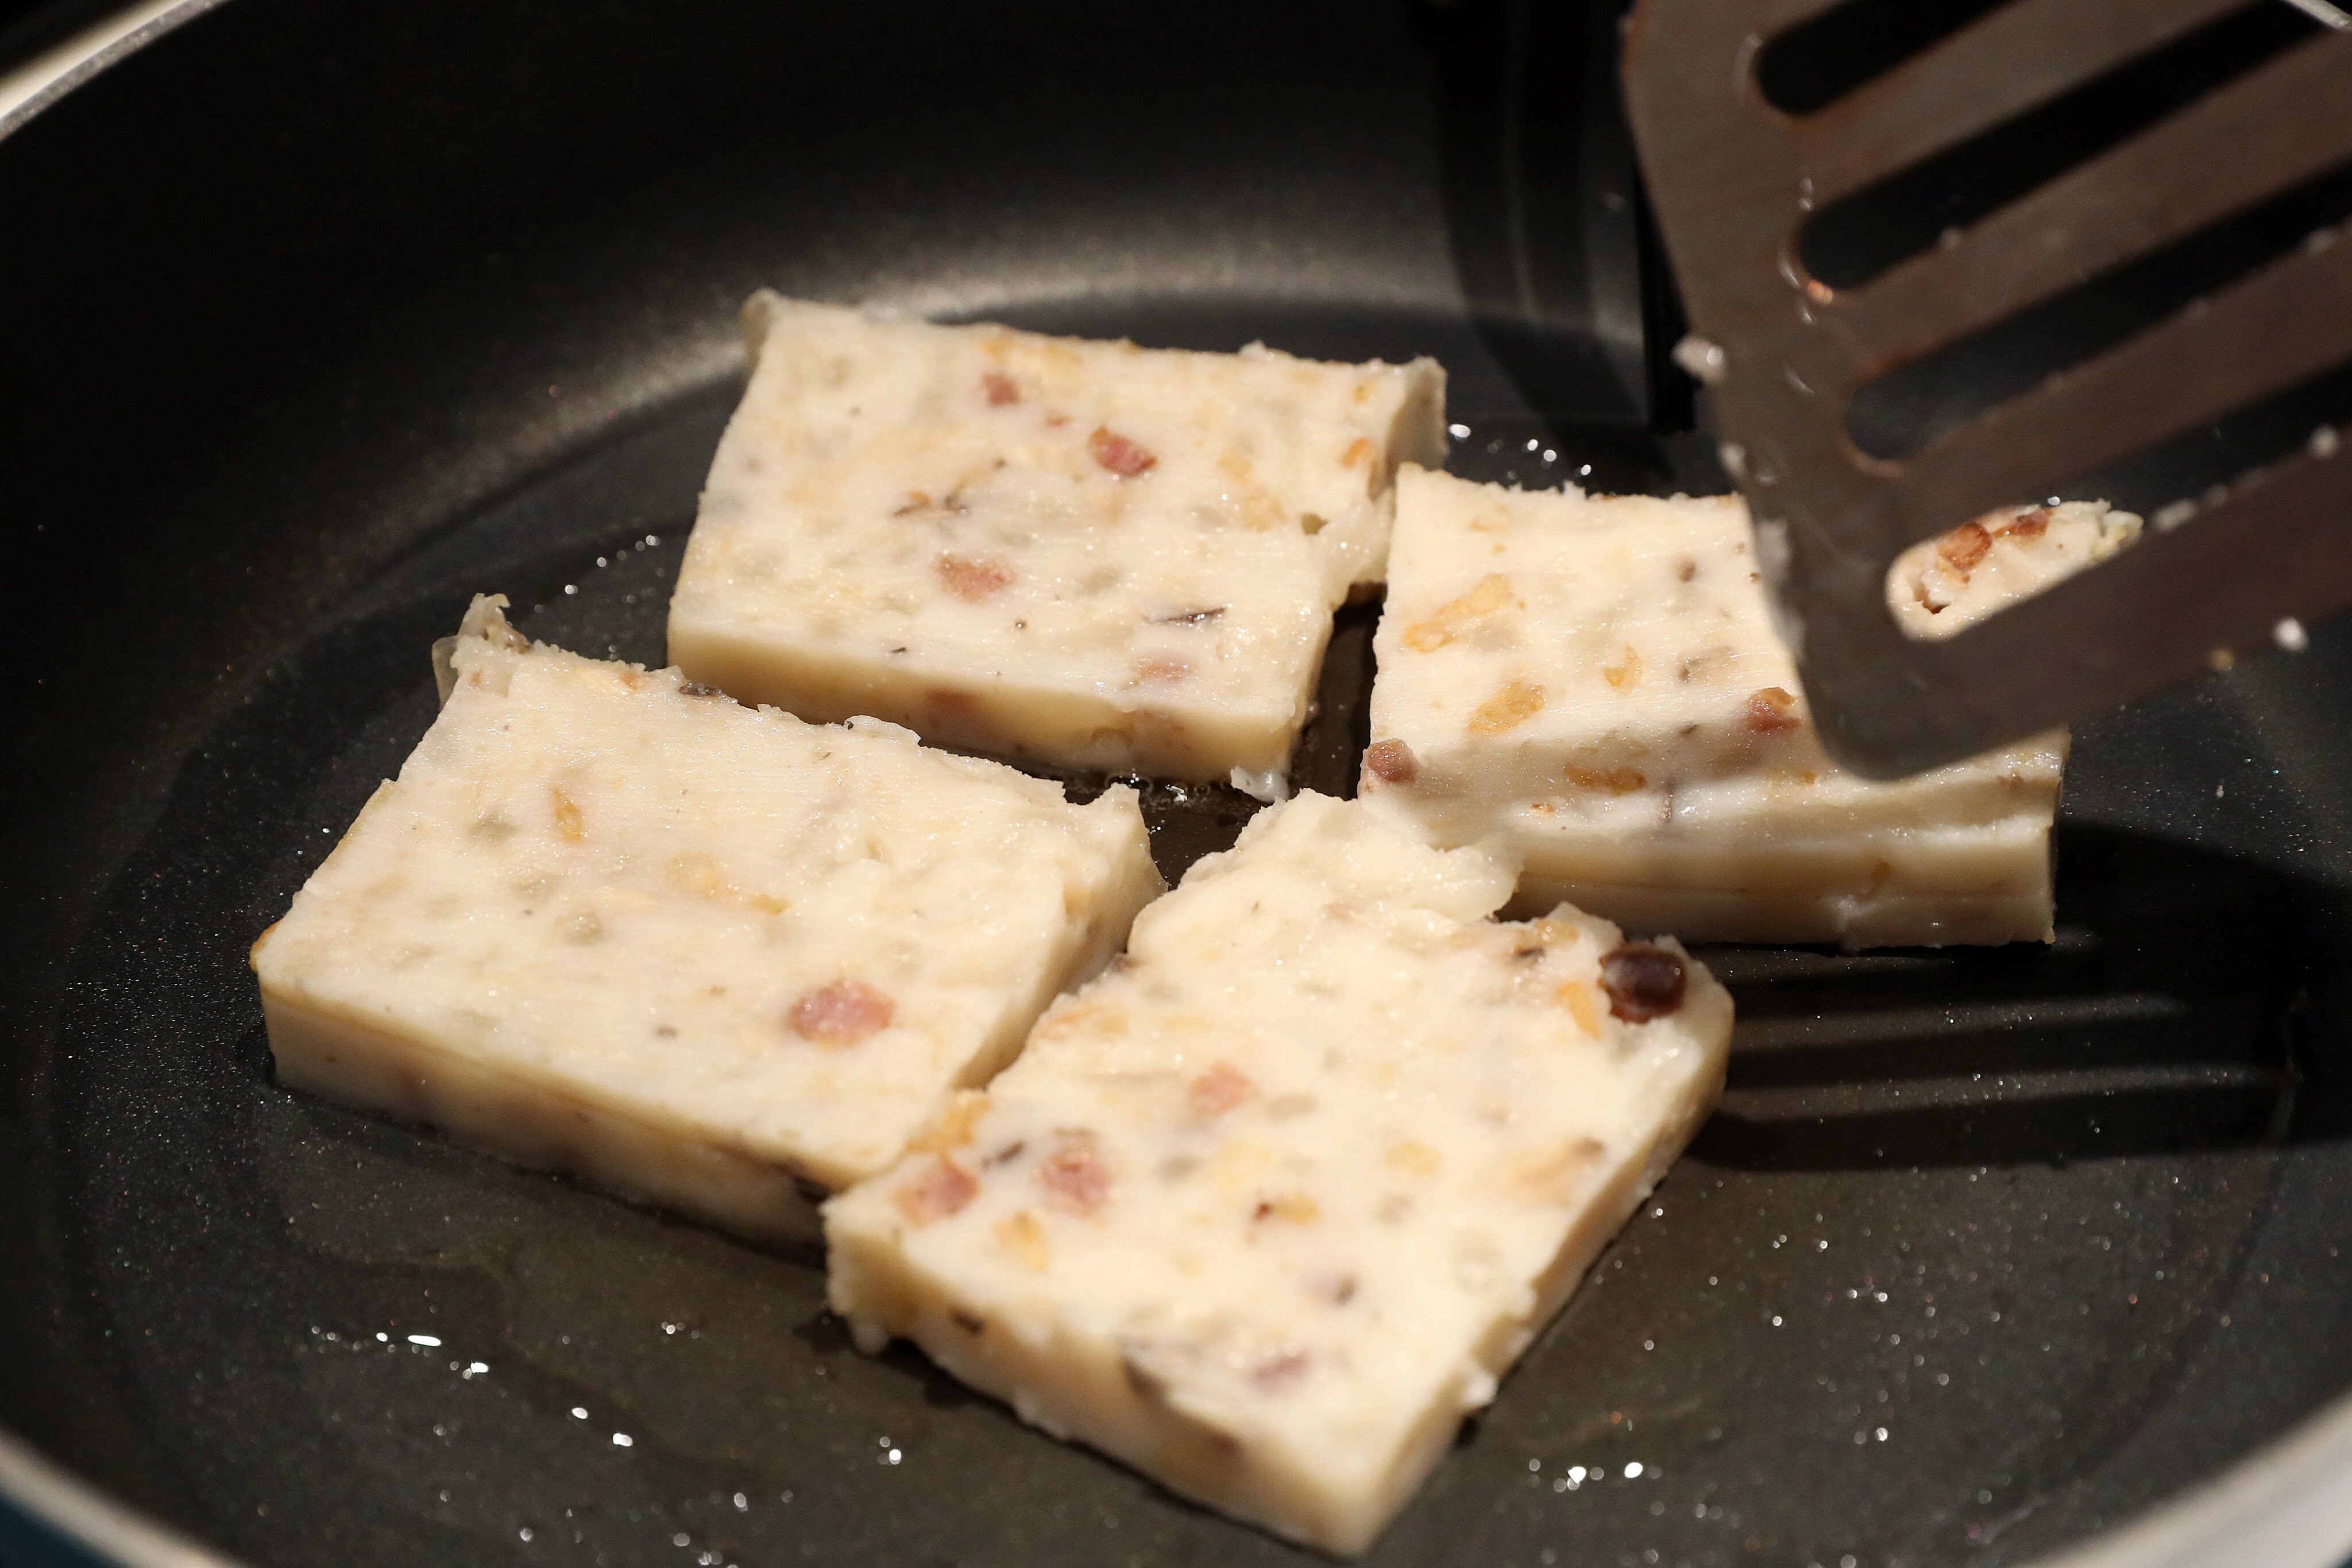 Loh bok goh - steamed radish cake - from Dashijie in Hong Kong being pan-fried for serving. Photo: SCMP/K. Y. Cheng